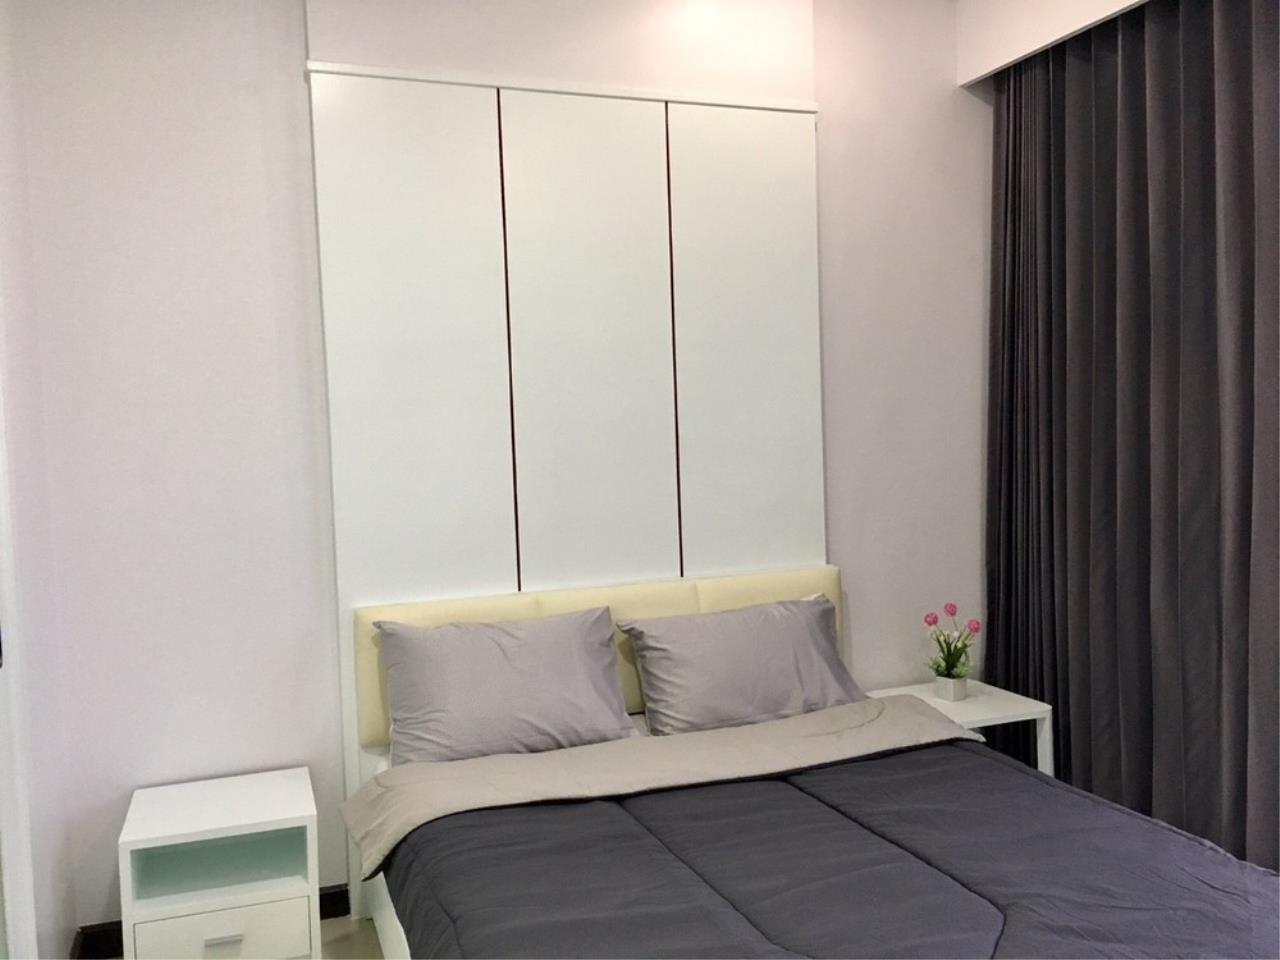 Quality Life Property Agency's S A L E WITH TENANT !! << SUPALAI PLACE >> SOI SUKHUMVIT 39; 2BR 73.50 SQ.M. HIGH FLOOR 3